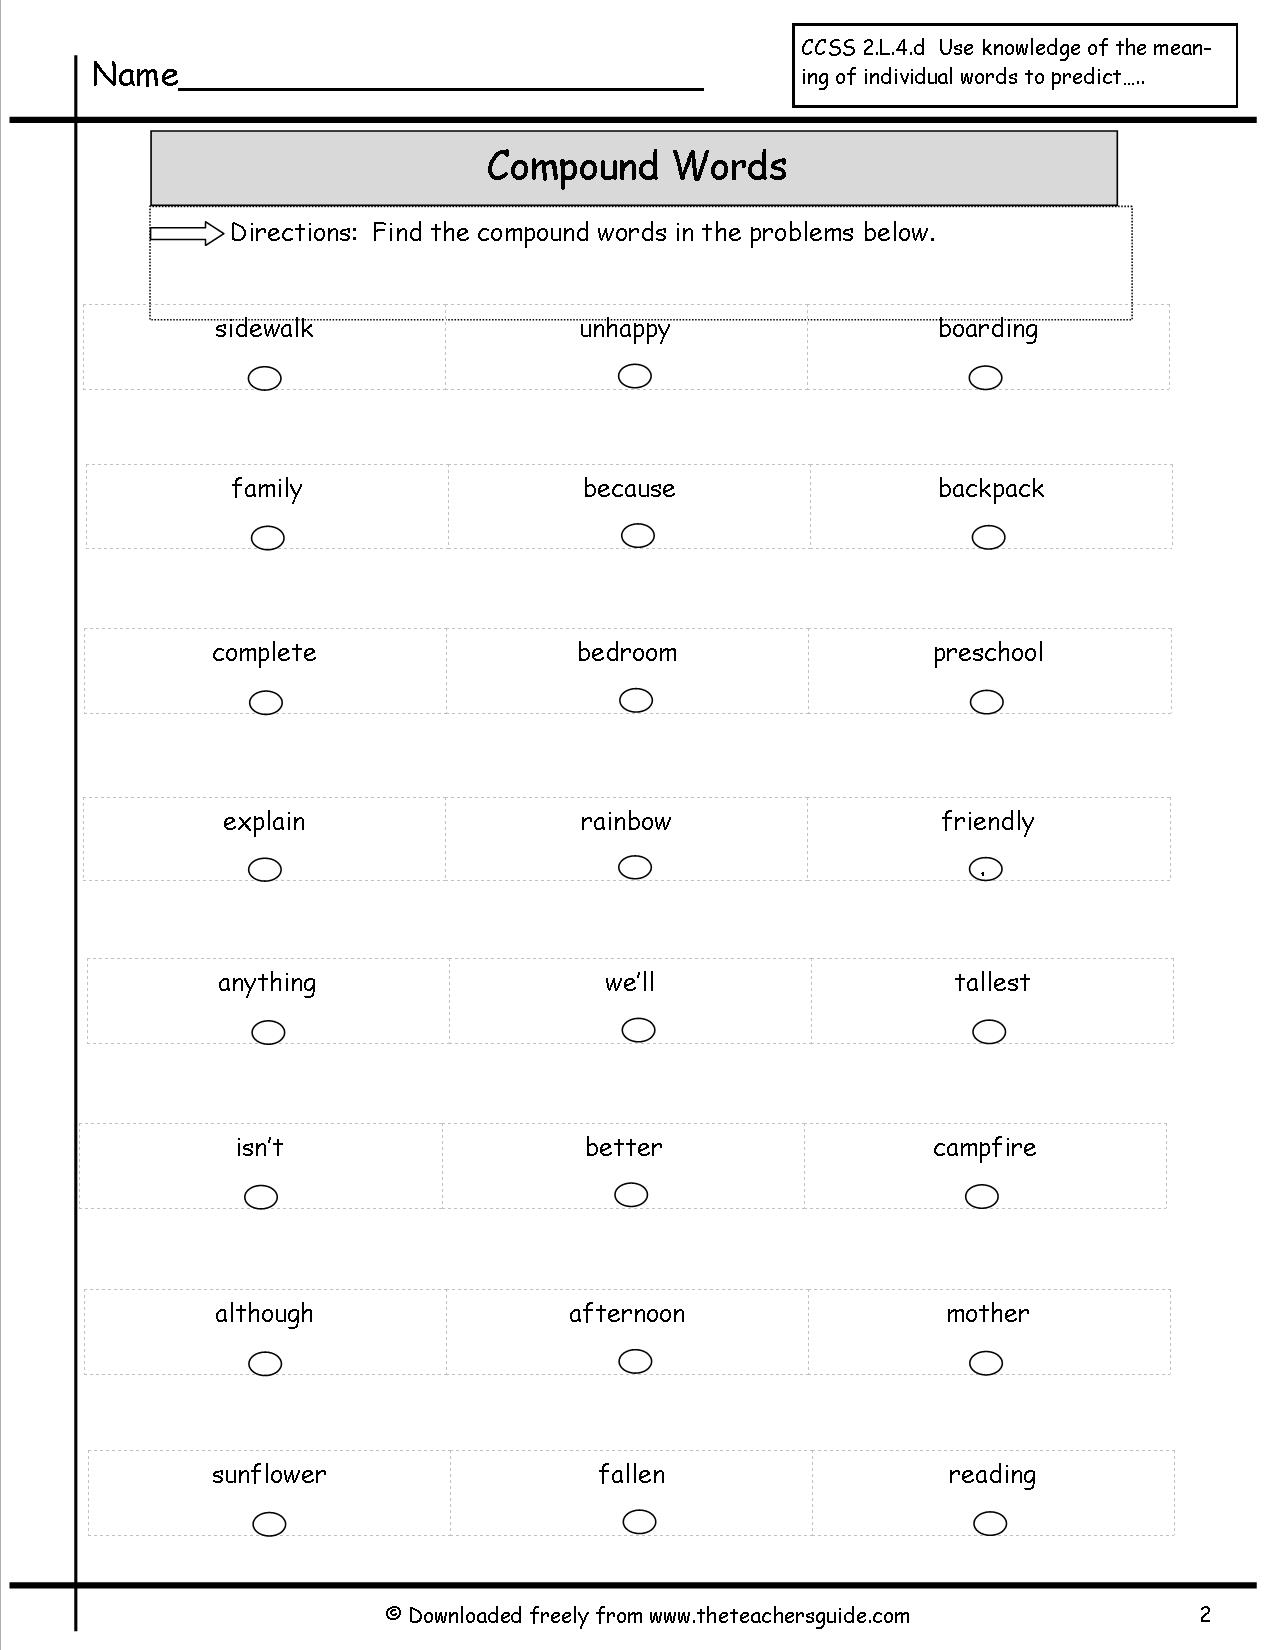 12 Best Images of Compound Words Worksheets 5th Grade - Compound